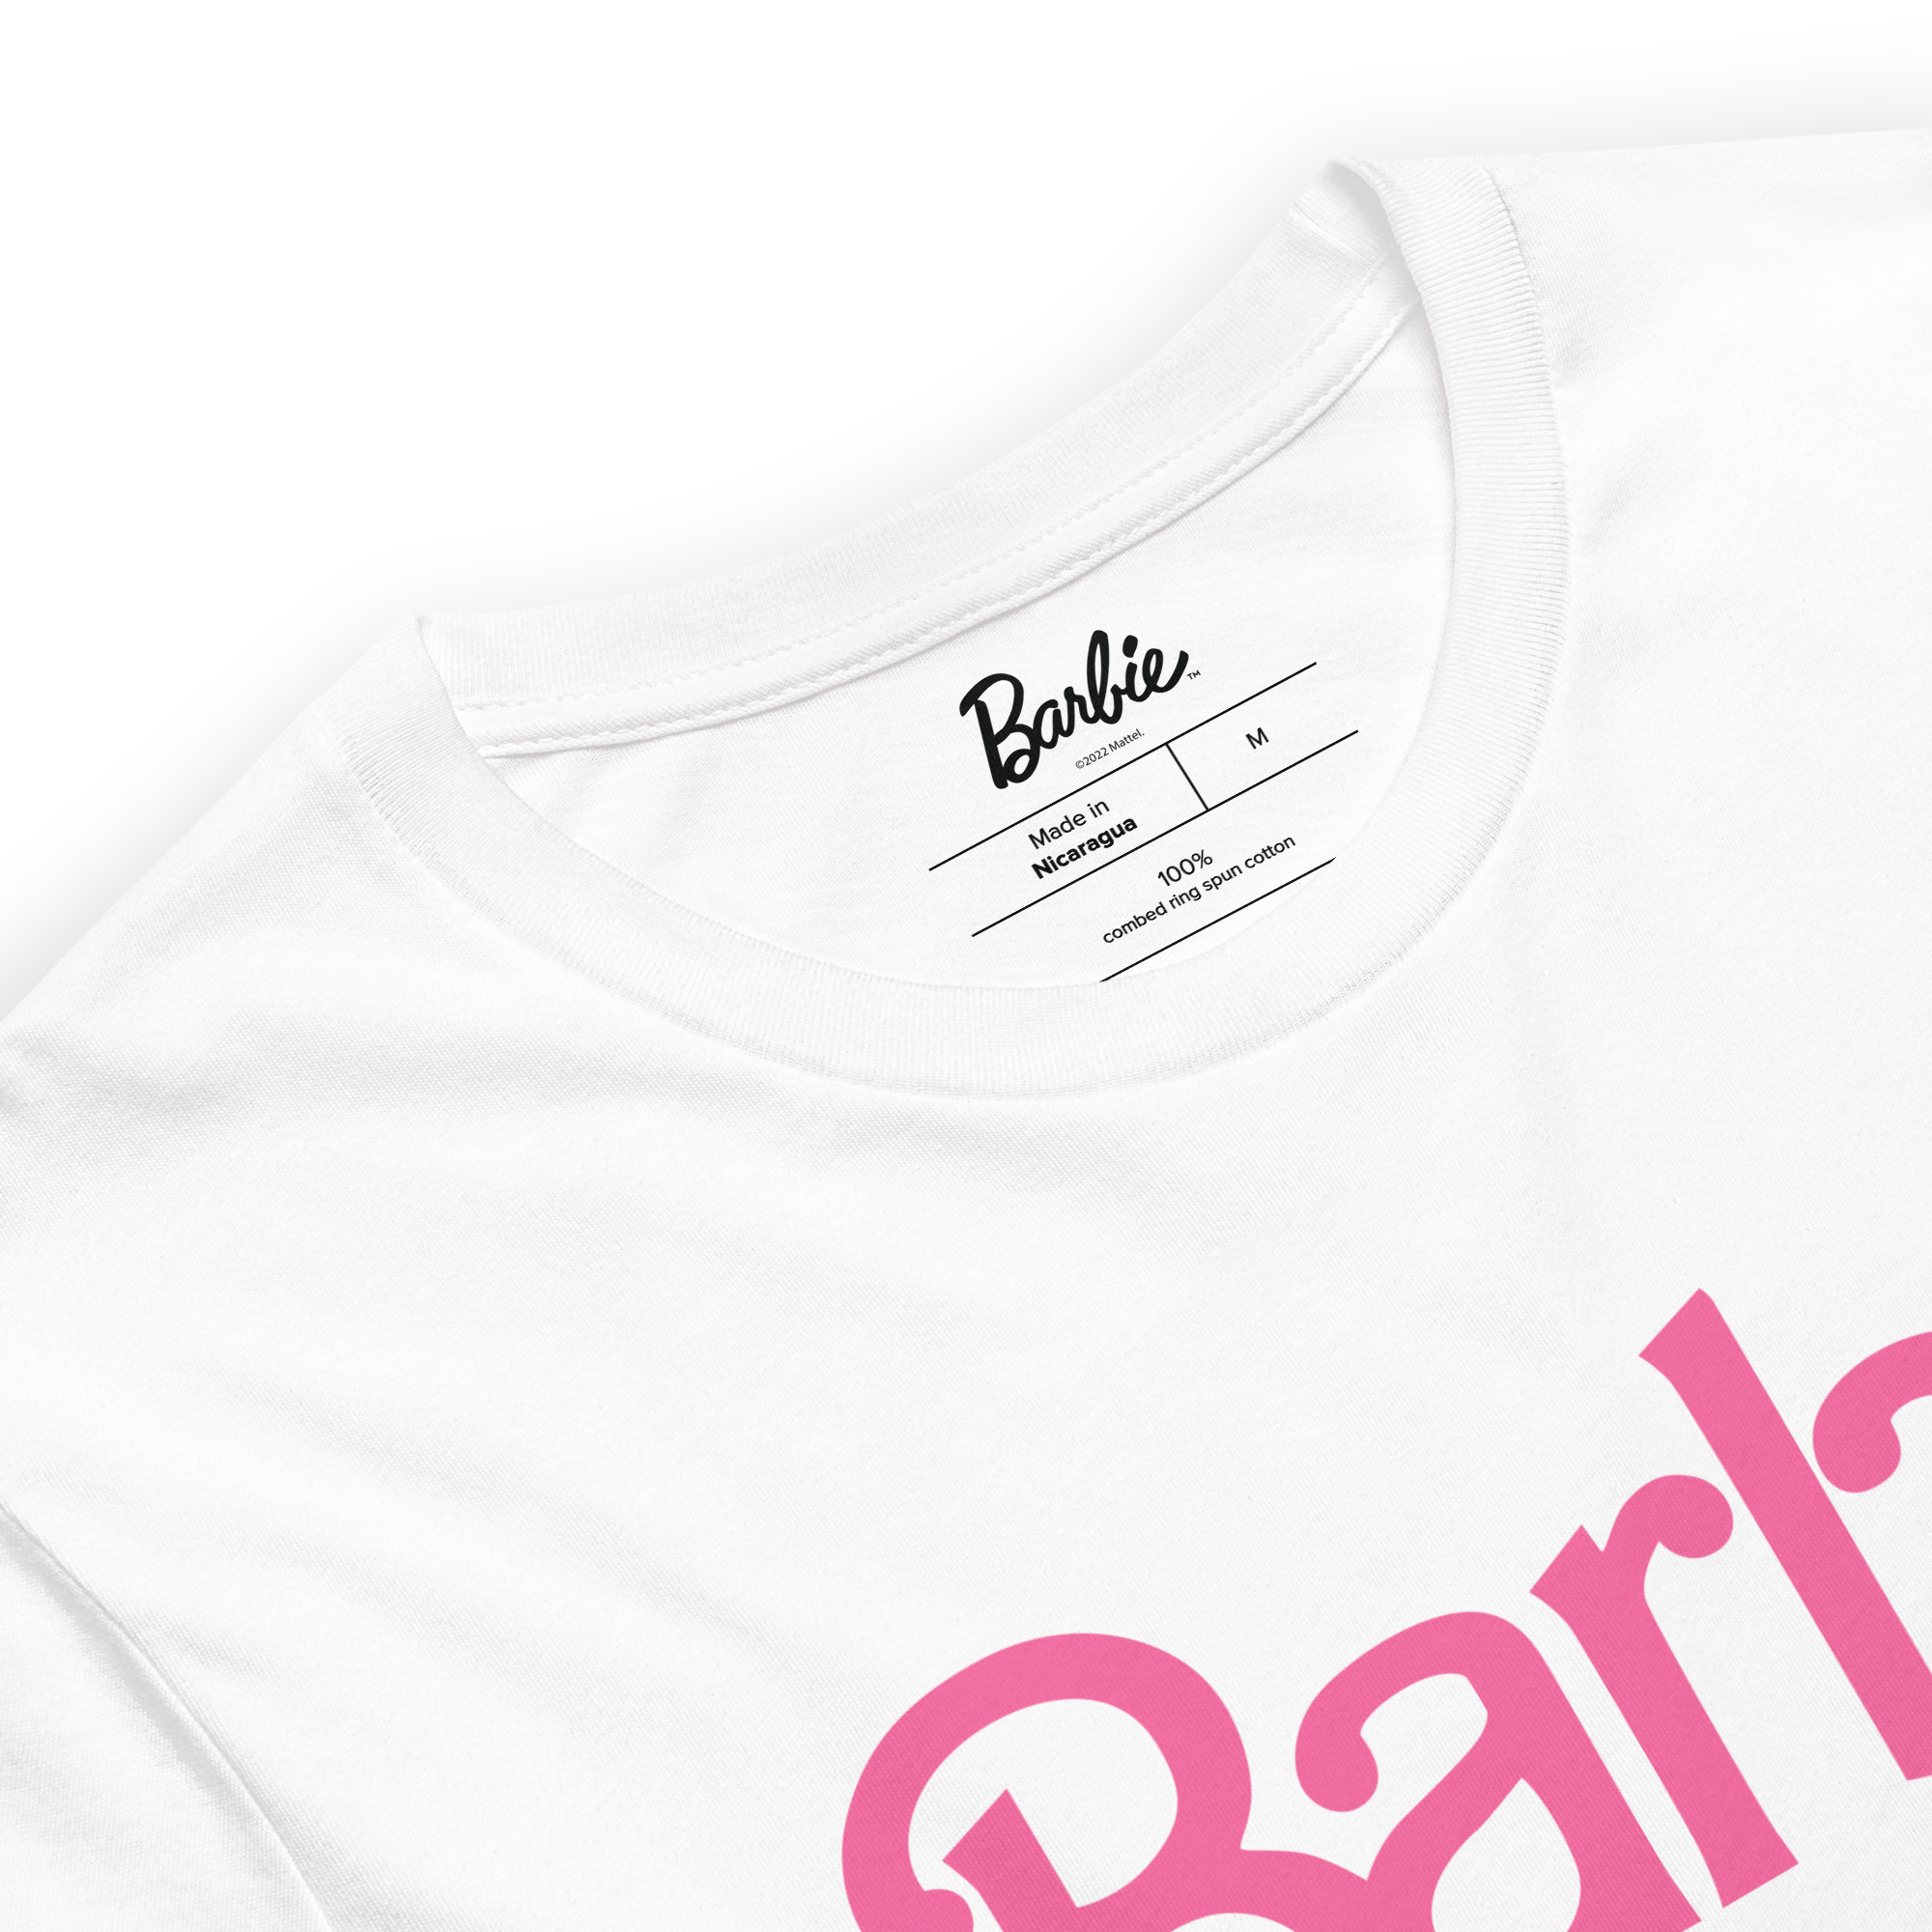 Optical white Oversized T-shirt with Barbie® lettering - Buy Online